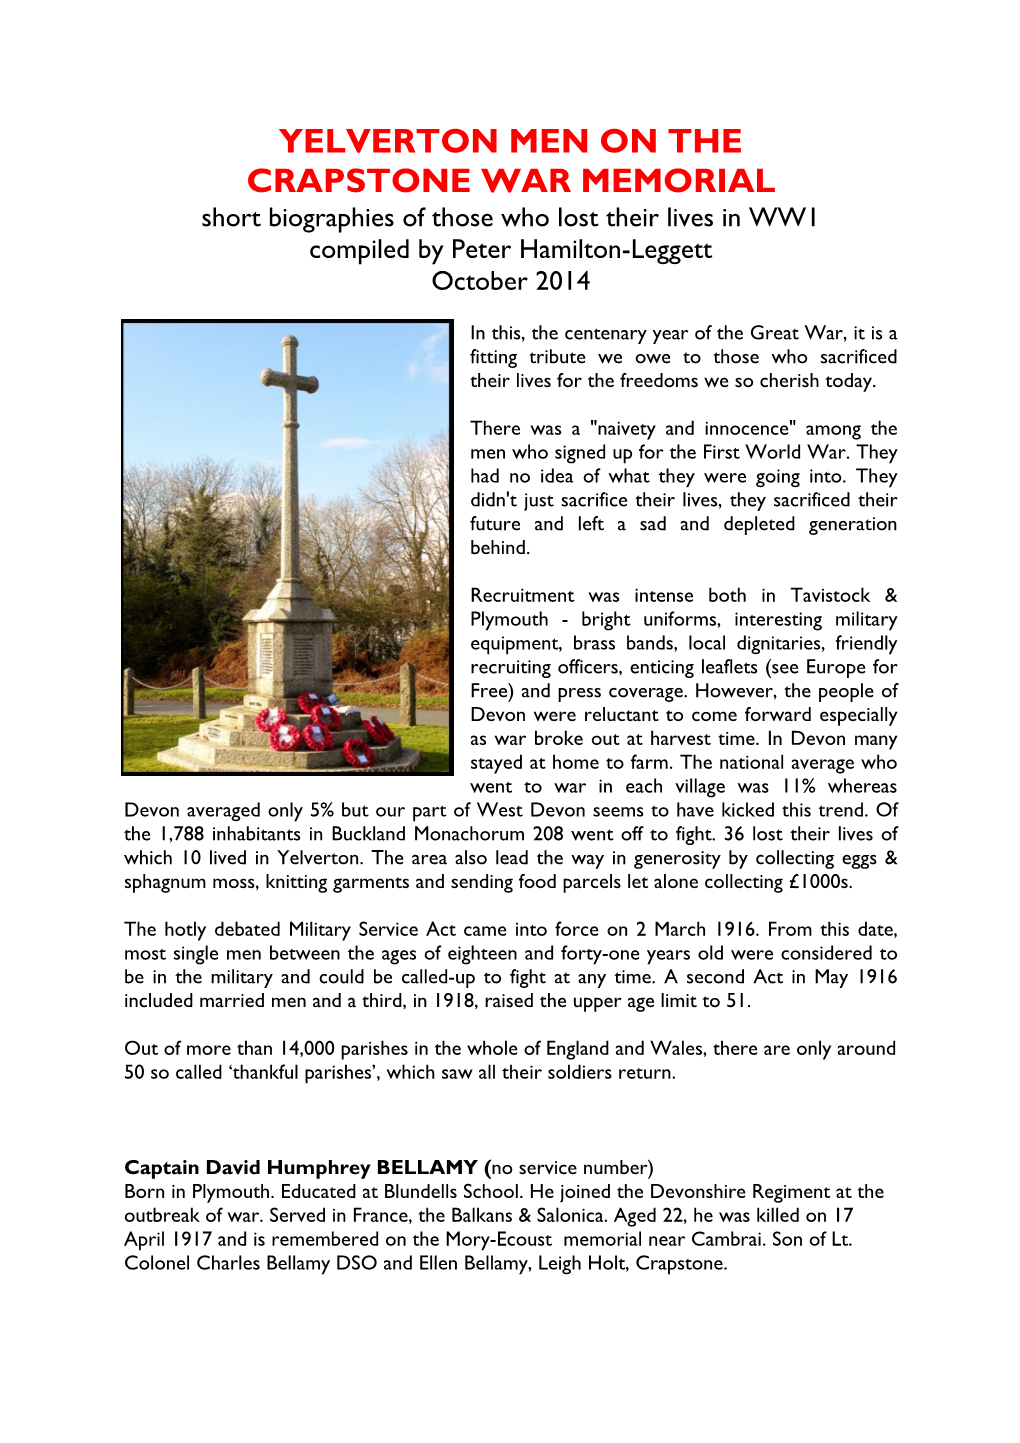 YELVERTON MEN on the CRAPSTONE WAR MEMORIAL Short Biographies of Those Who Lost Their Lives in WW1 Compiled by Peter Hamilton-Leggett October 2014